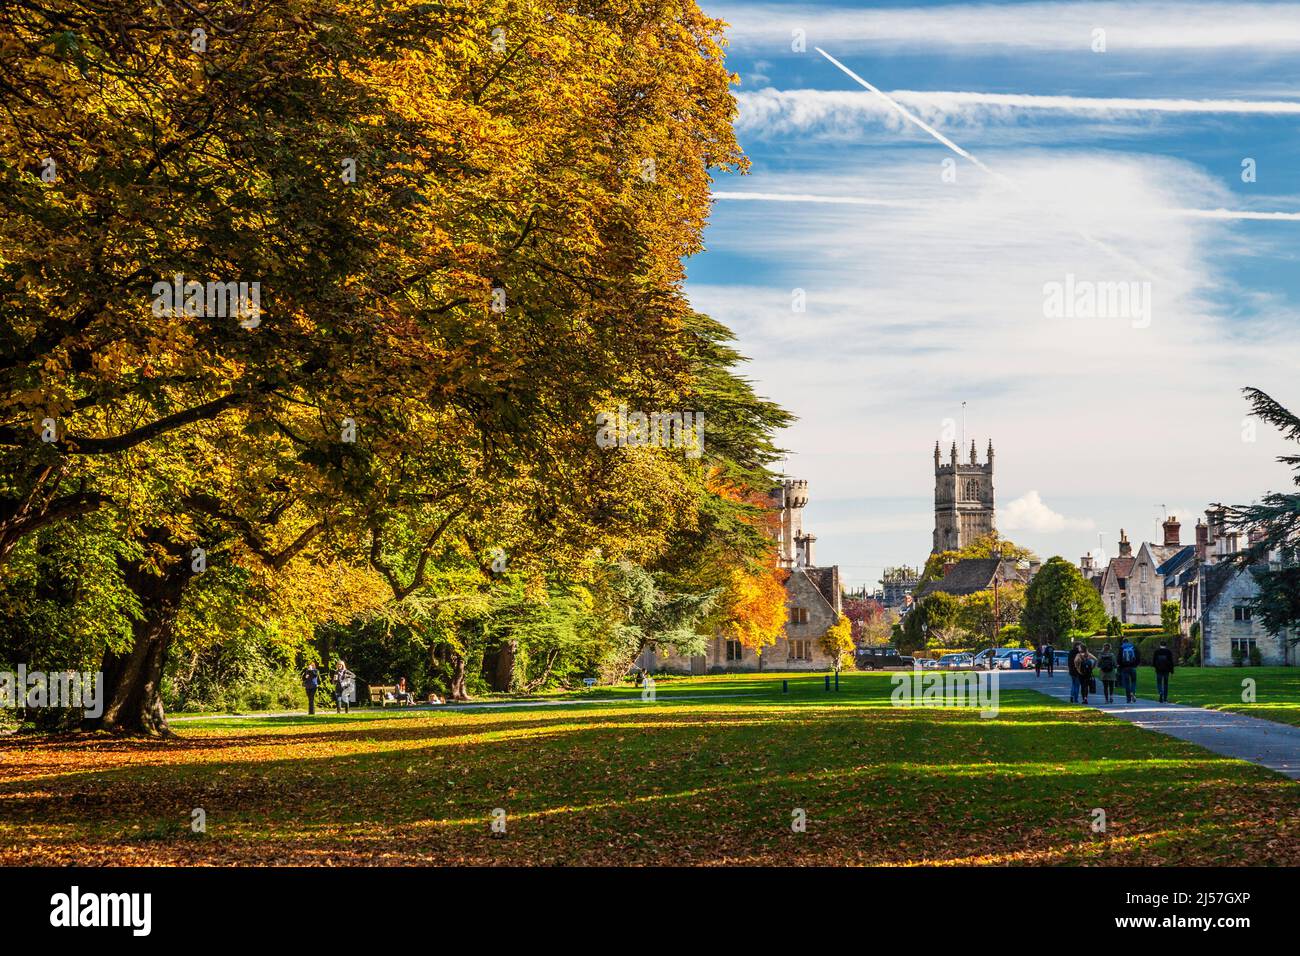 Beautiful autumn colours at Cirencester Park on the Bathurst Estate in Gloucestershire.  The tower of the Church of John the Baptist and part of the Stock Photo